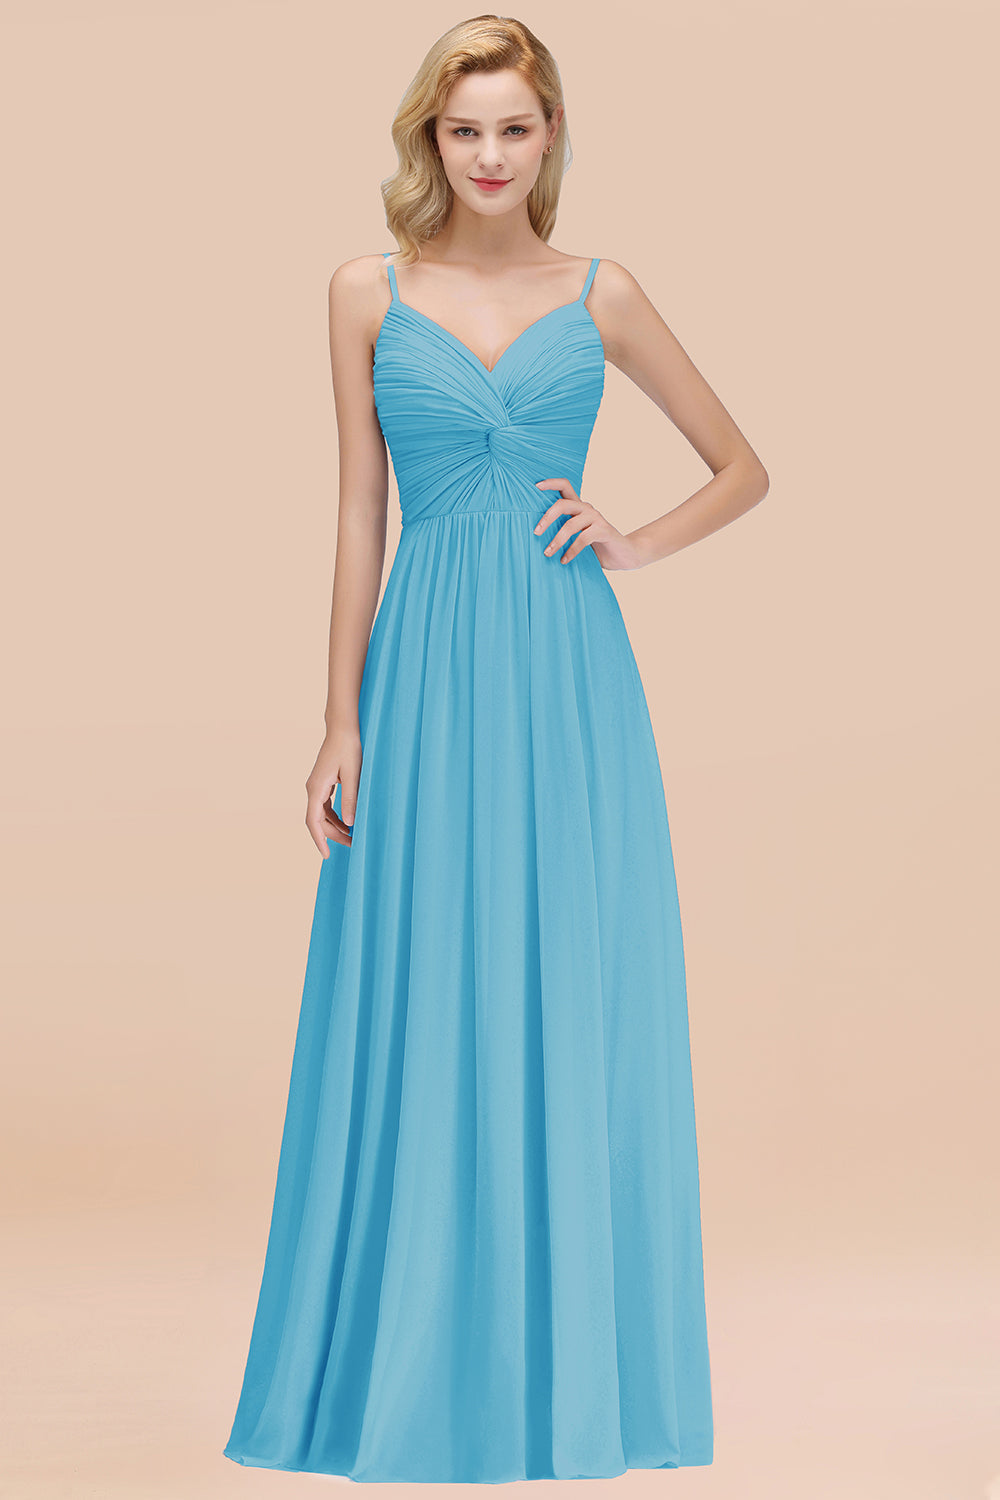 Load image into Gallery viewer, Chic V-Neck Pleated Backless Bridesmaid Dresses with Spaghetti Straps-27dress
